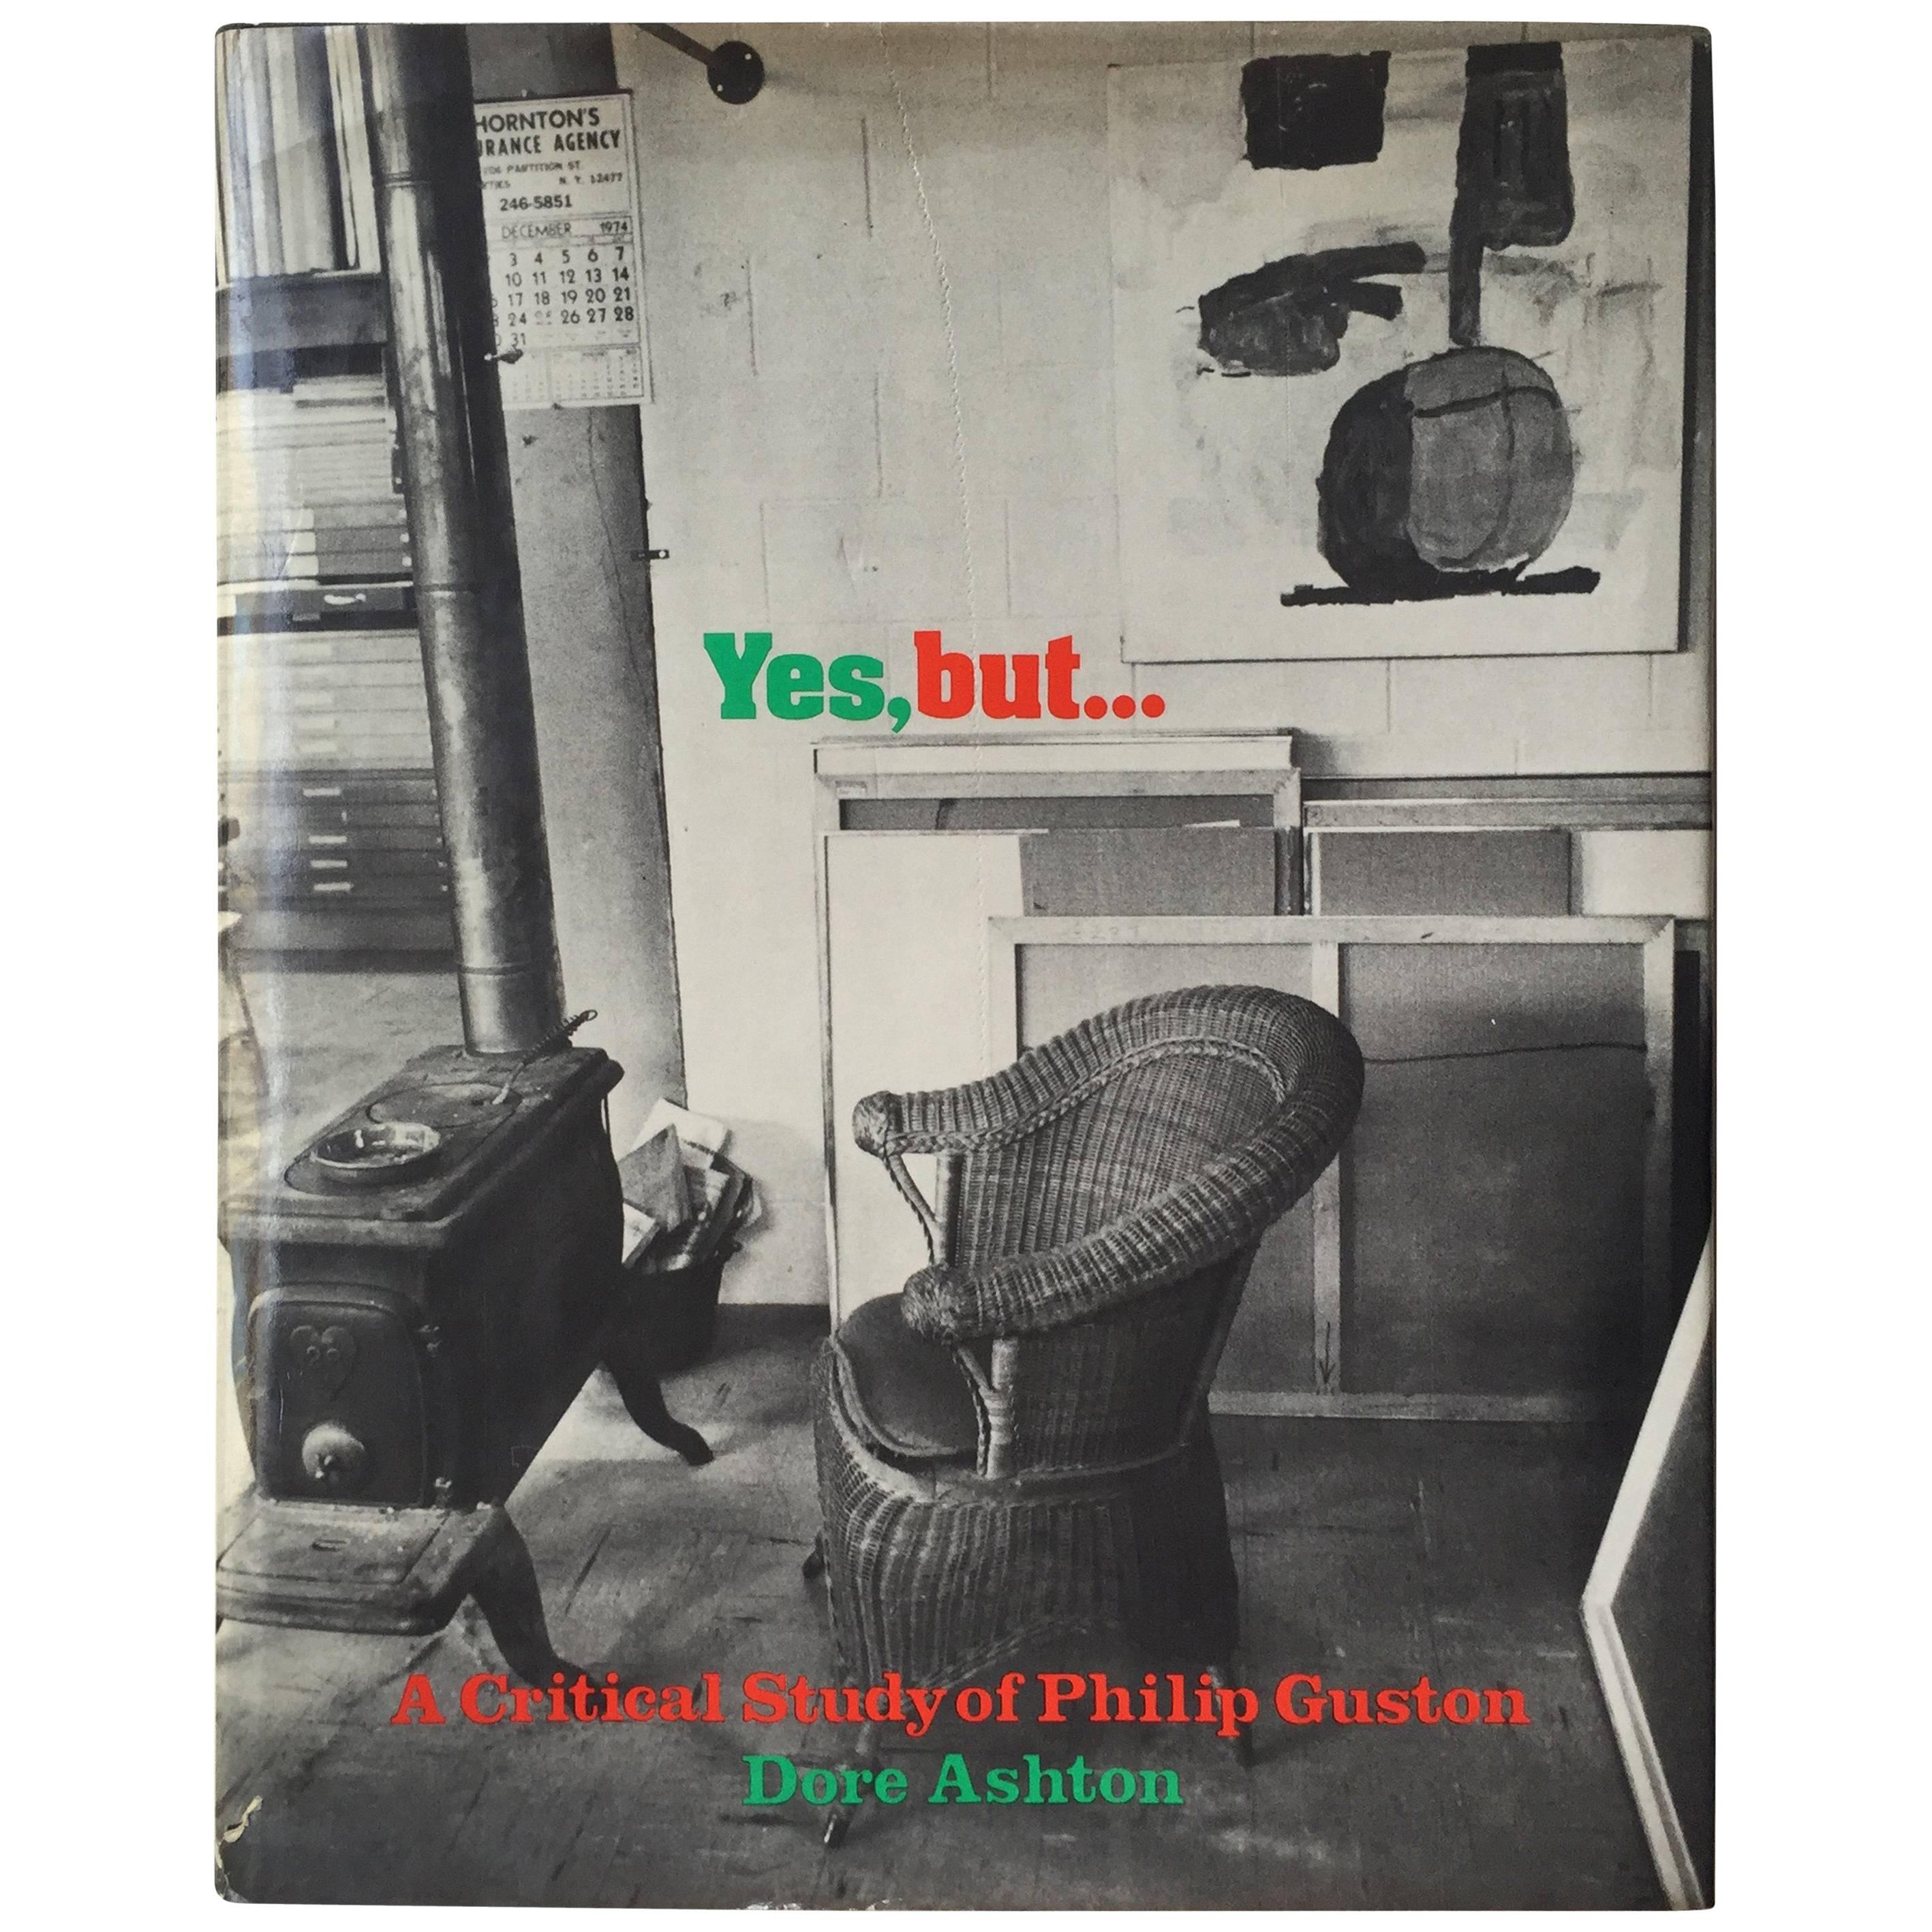 Yes, but... A Critical  Study of Philip Guston - Dore Ashton - 1st Edition, 1976 For Sale